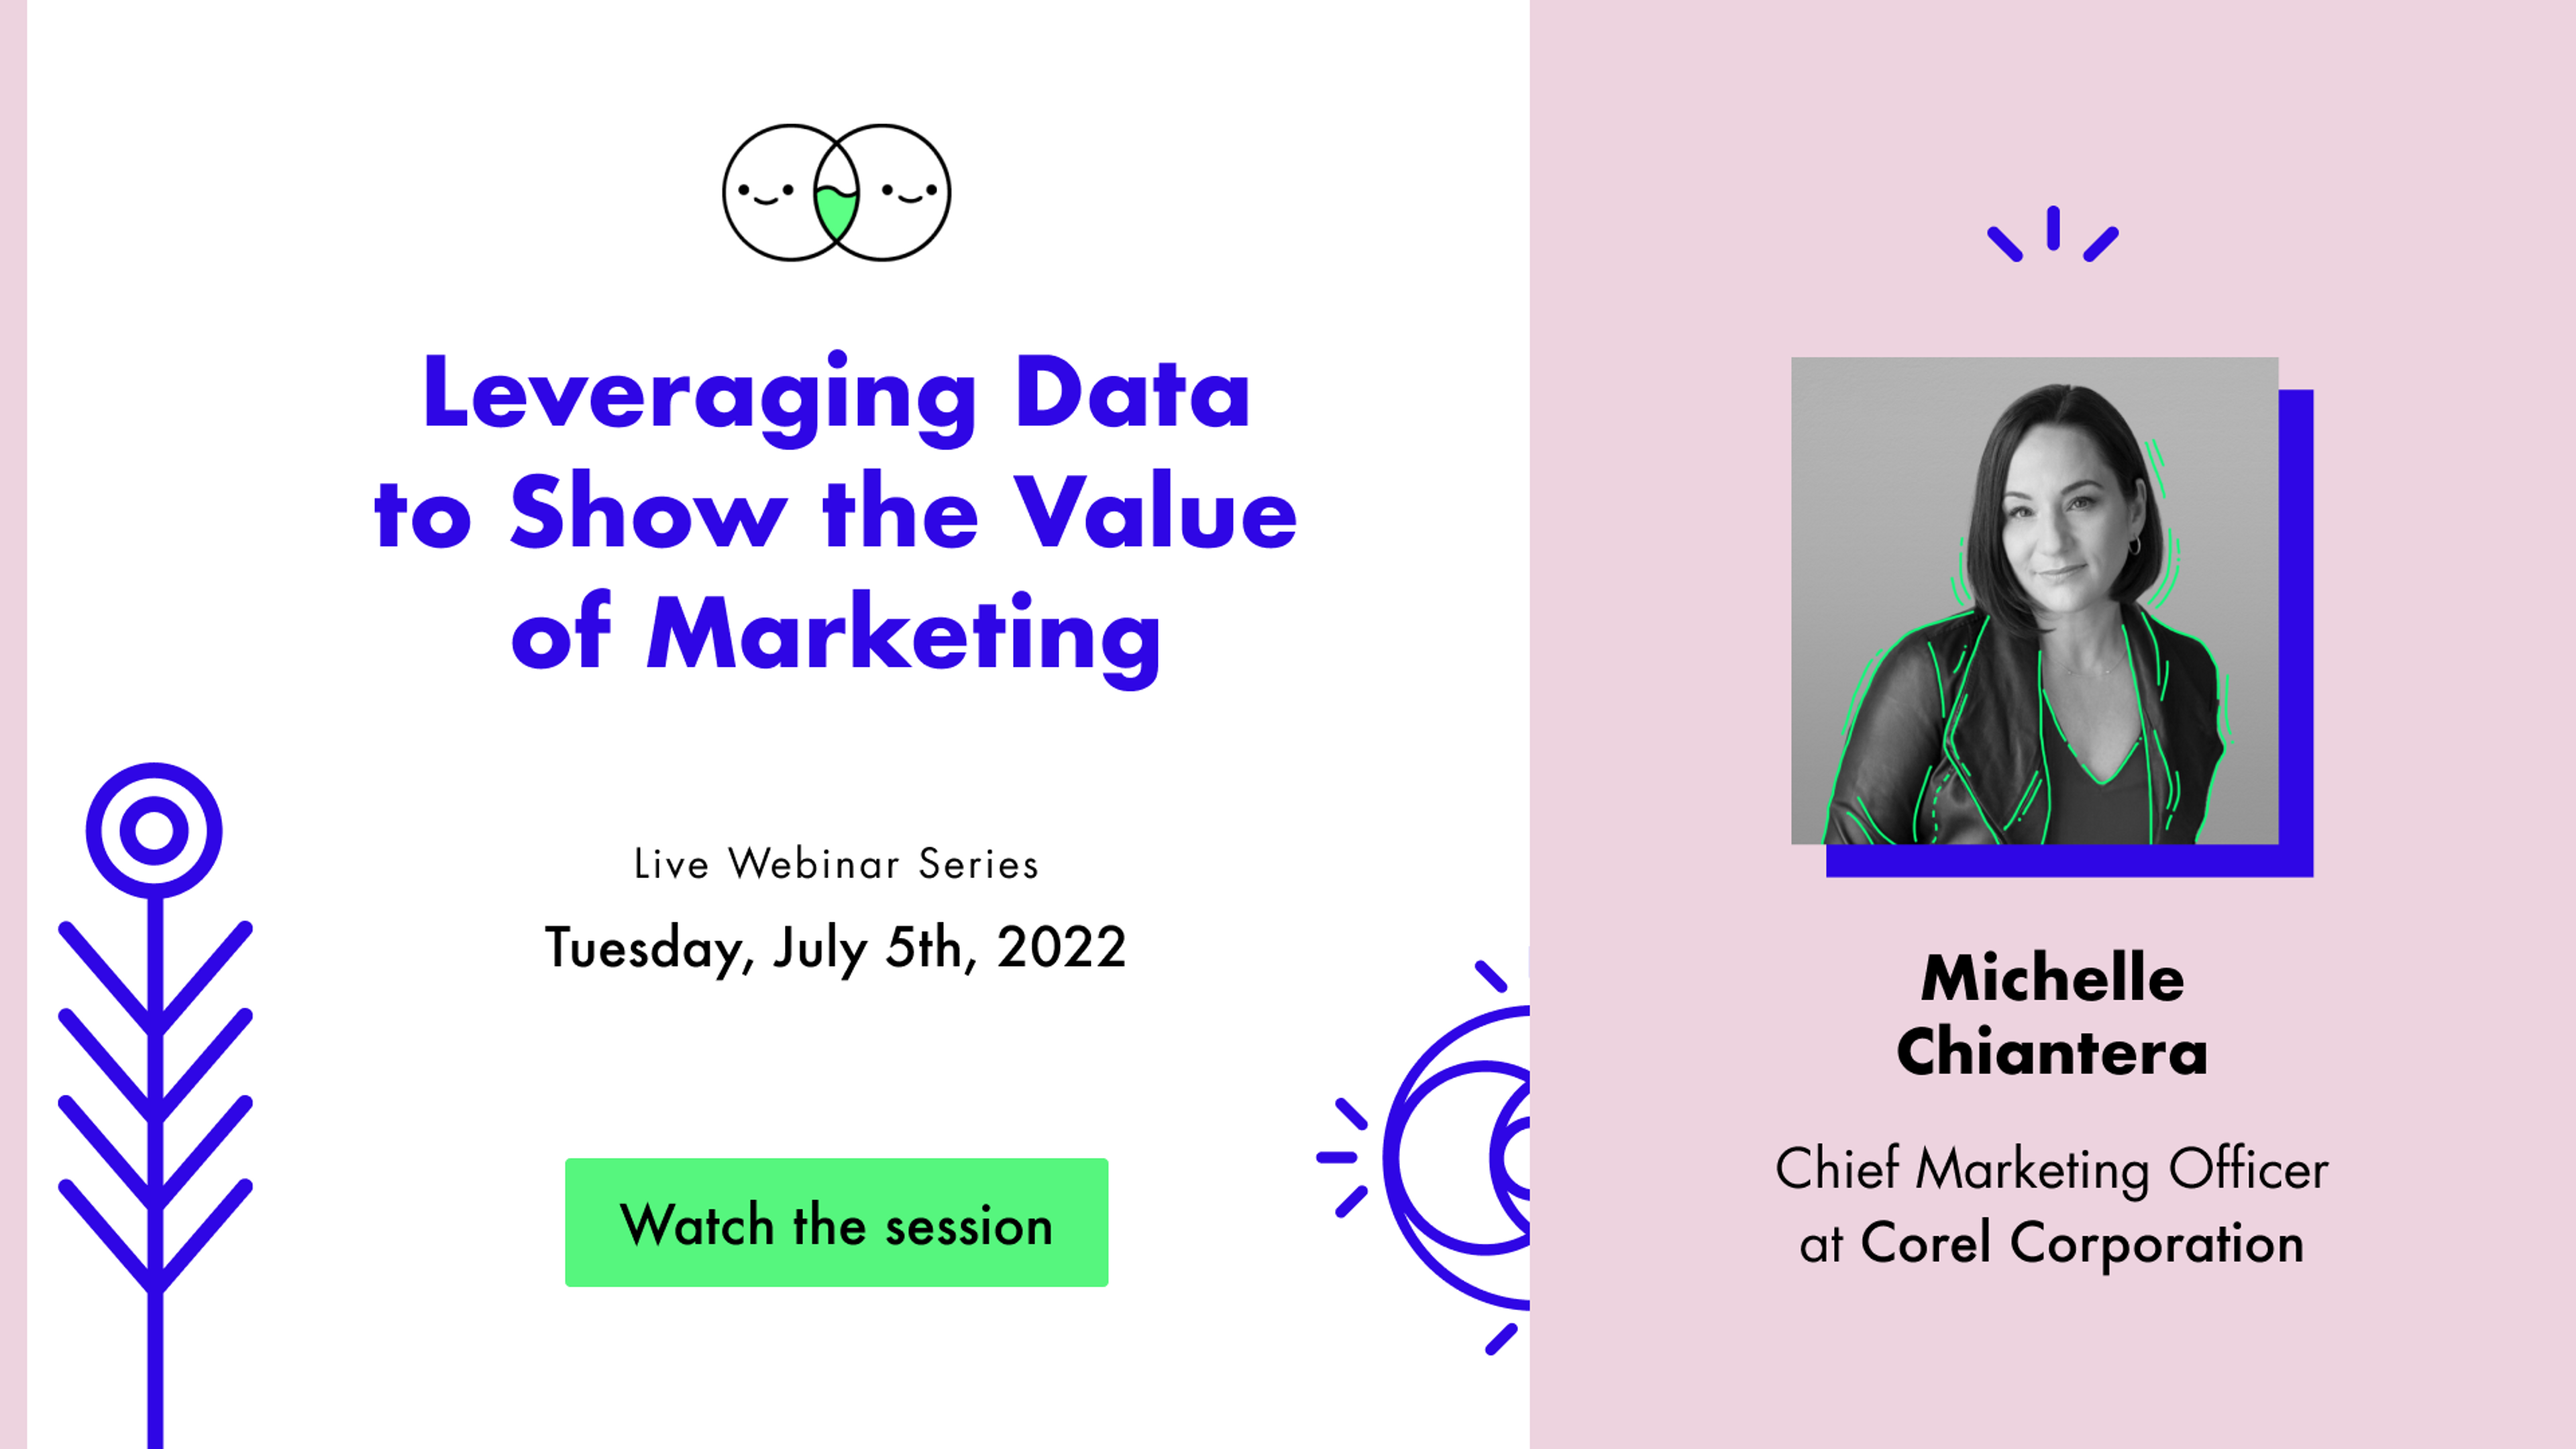 Leveraging Data to Show the Value of Marketing